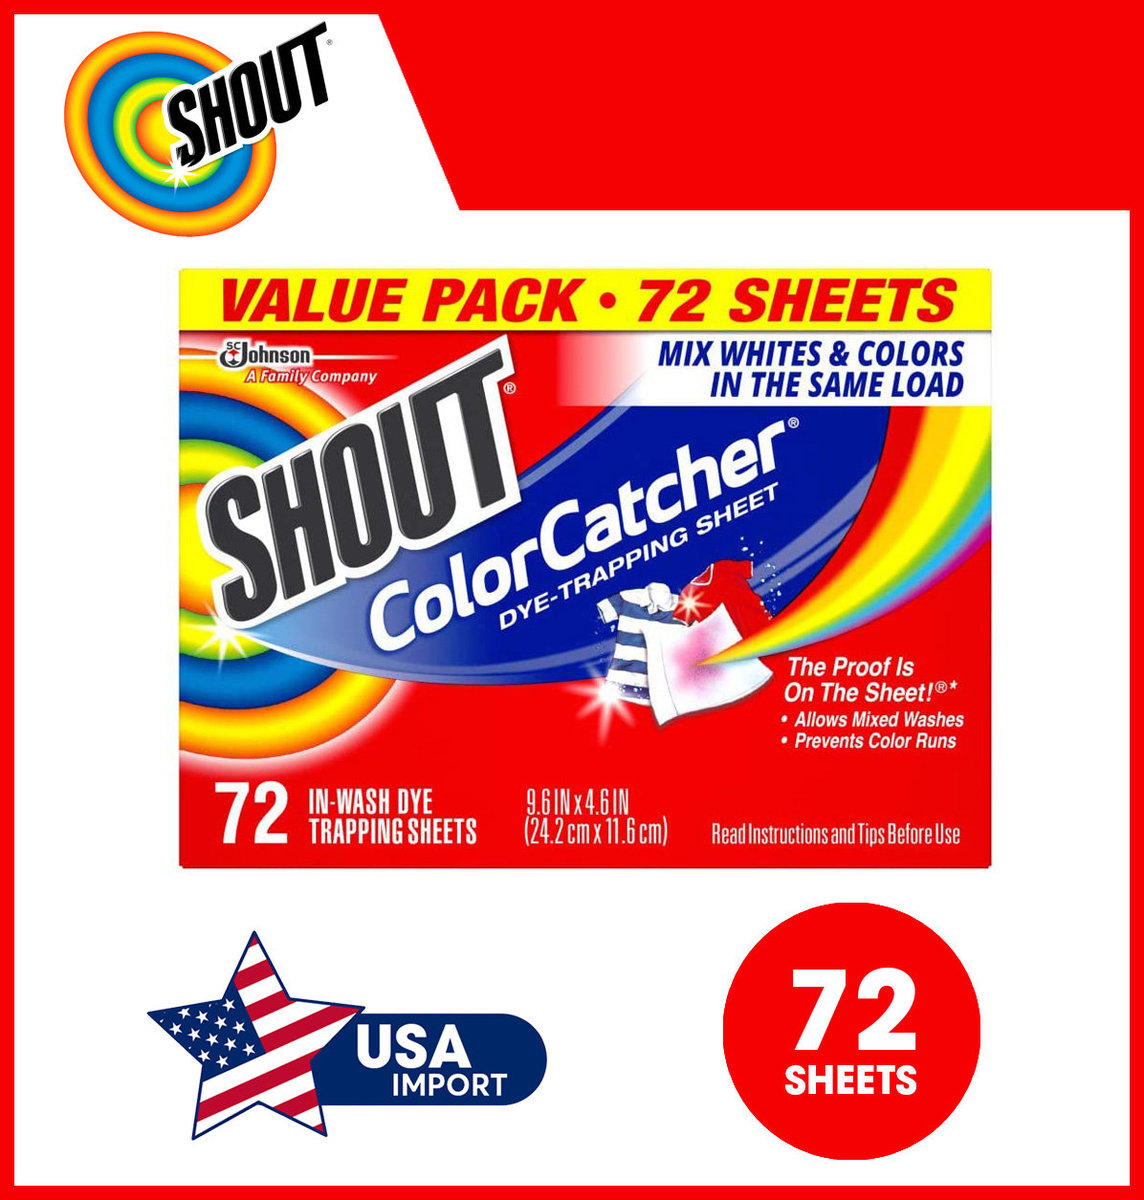 shout-color-catcher-sheets-for-laundry-dye-trapping-sheets-72-count-usa-parallel-import